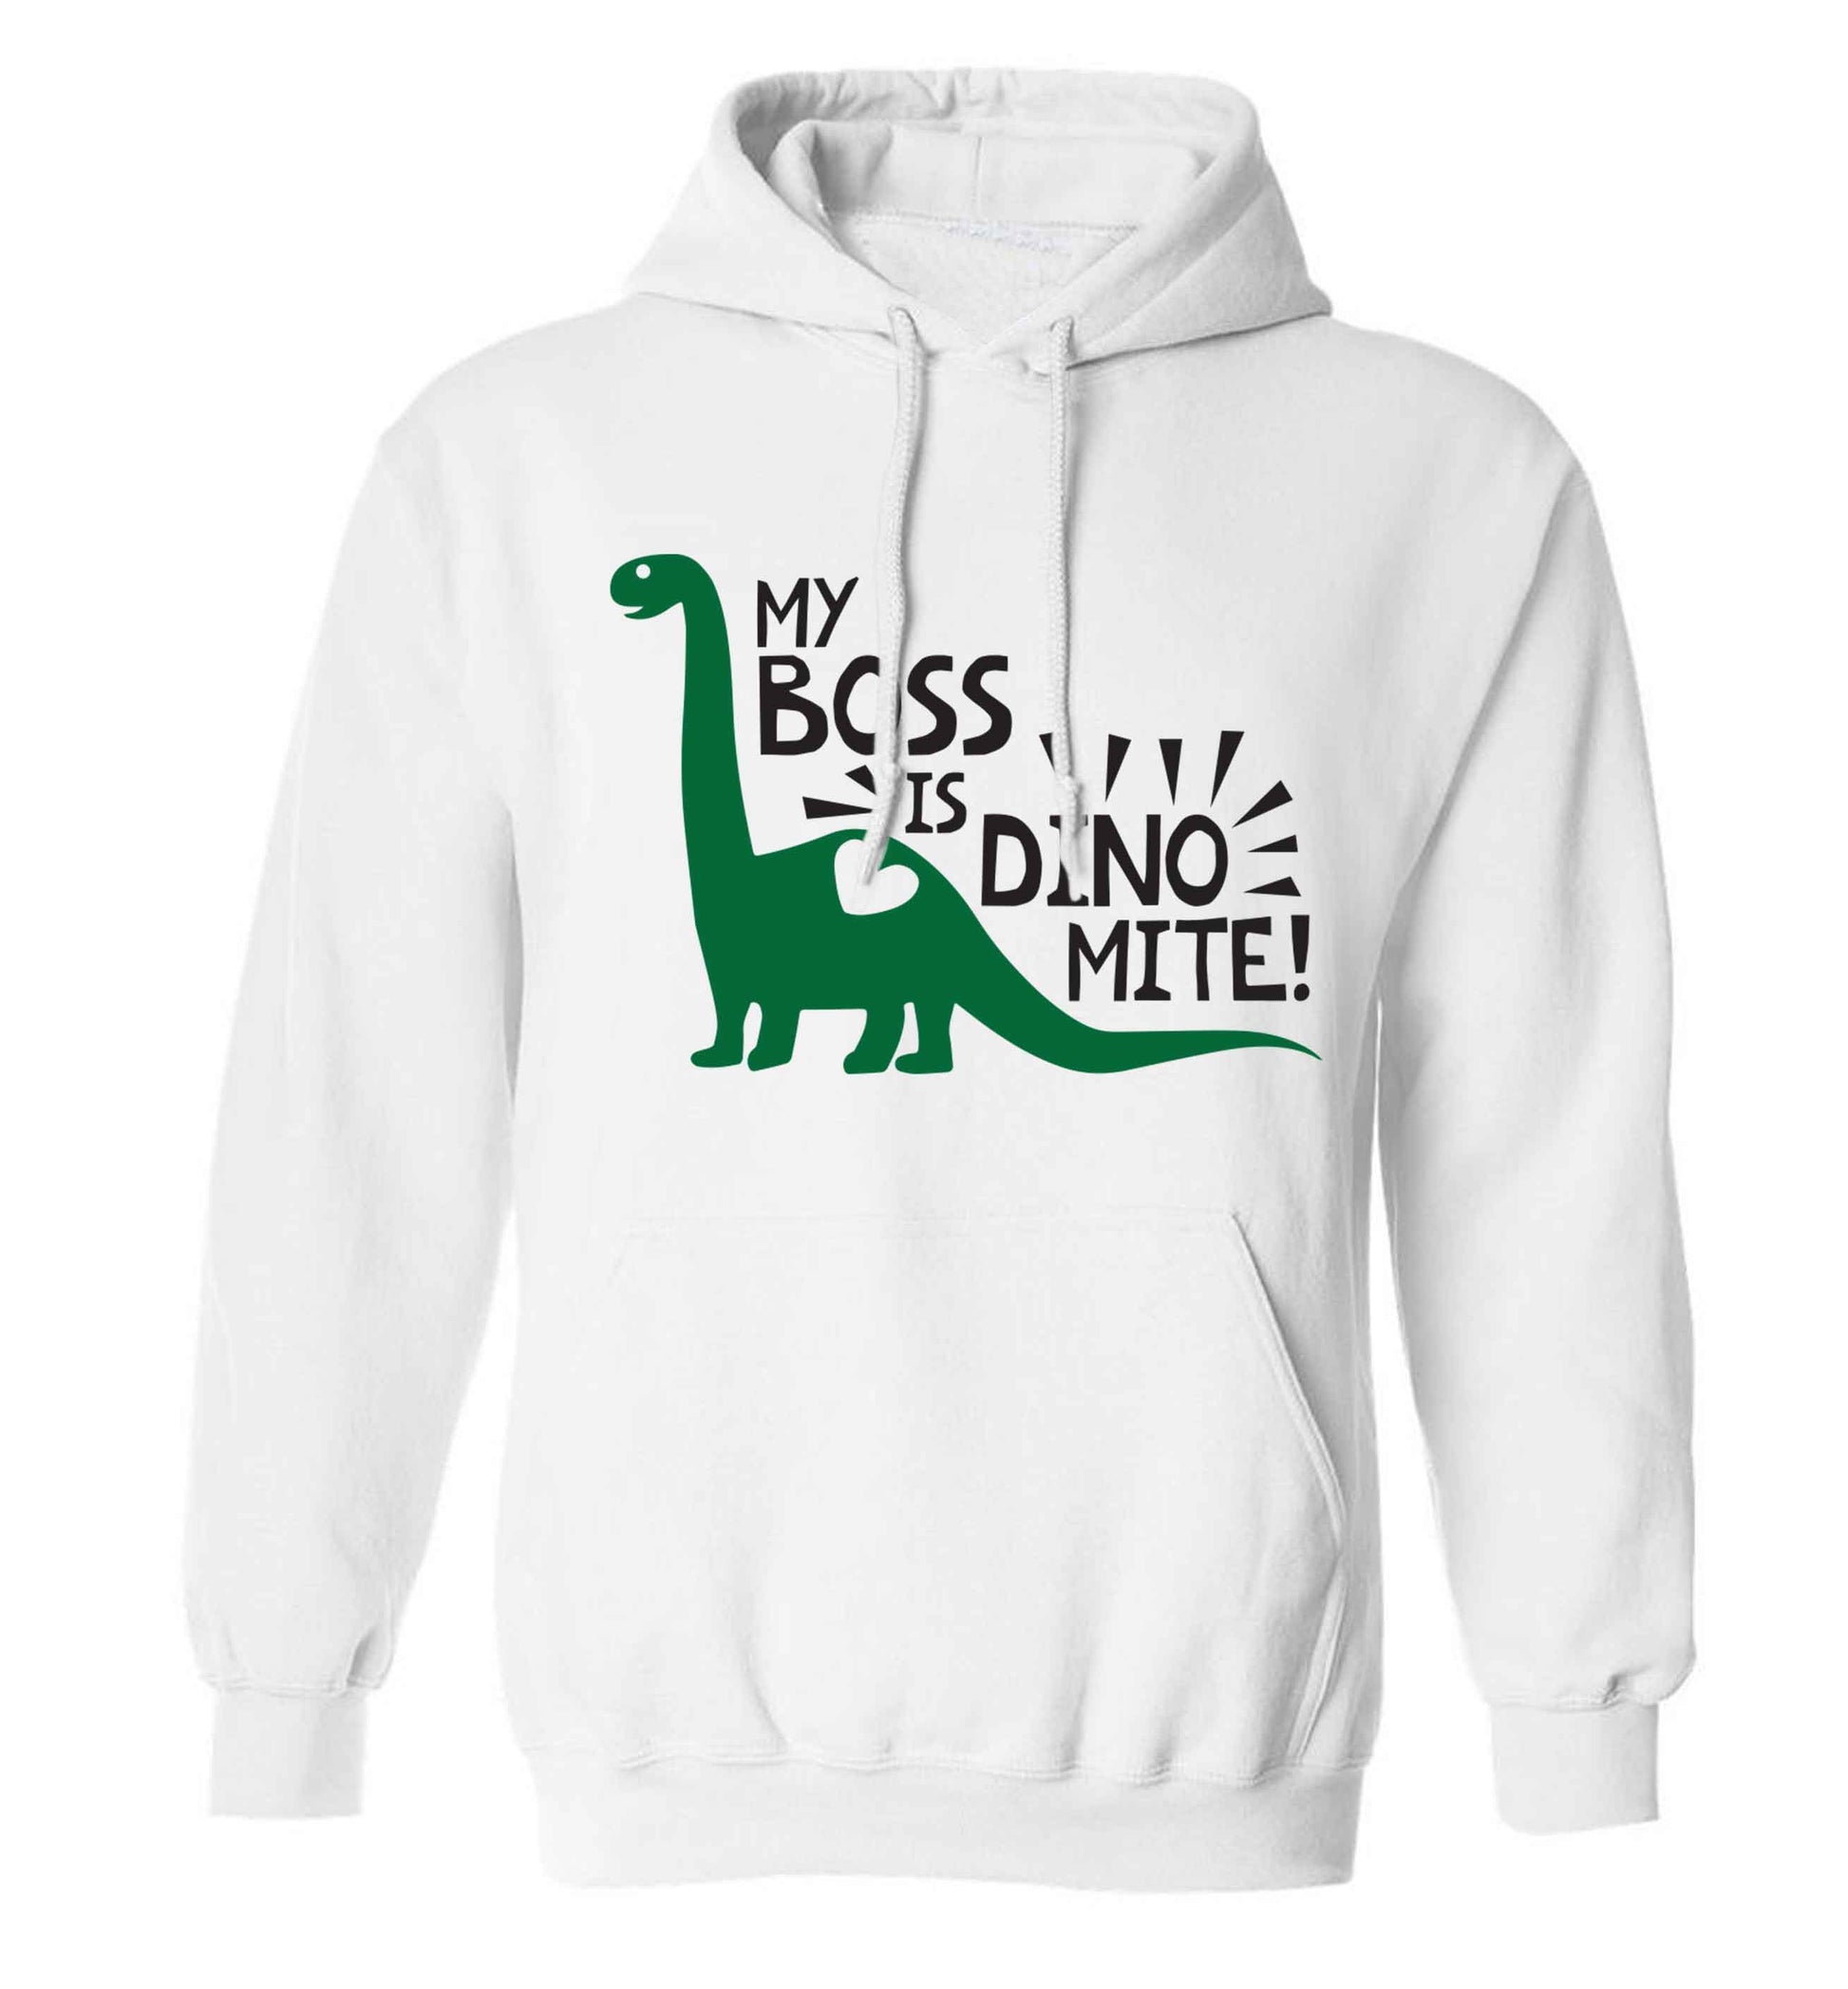 My boss is dinomite! adults unisex white hoodie 2XL